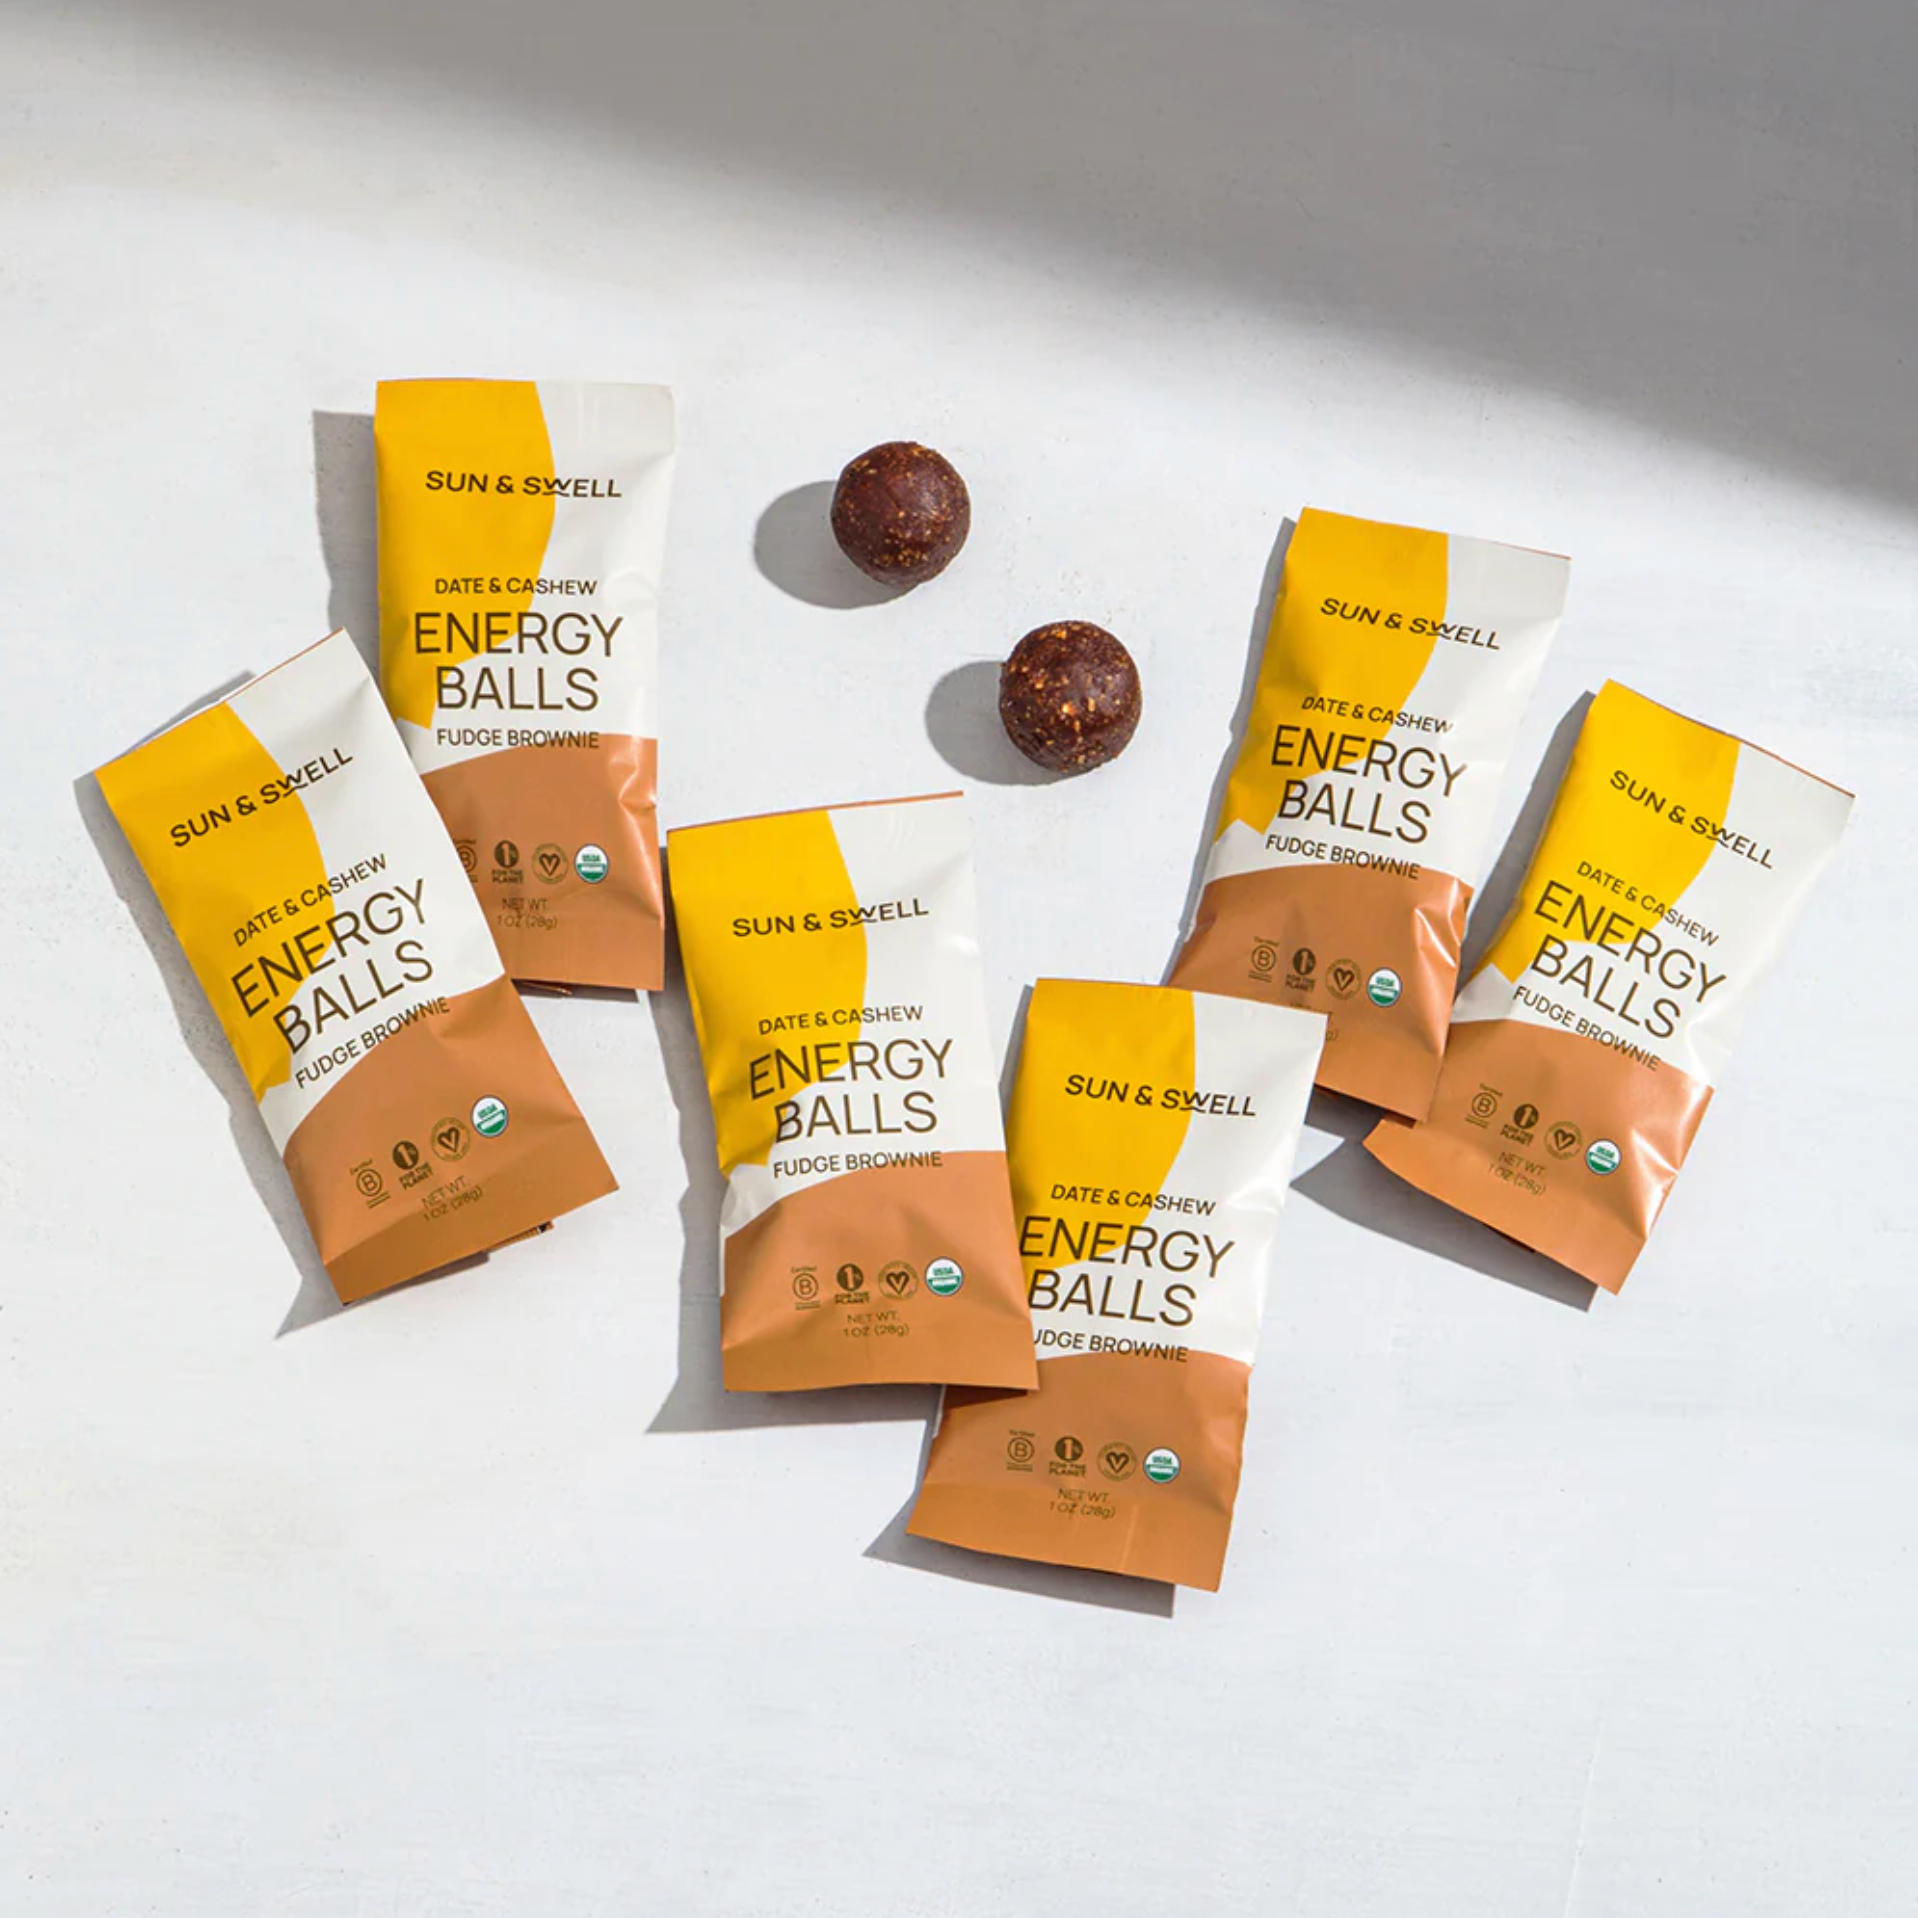 Set of the Sun &amp; Swell Date &amp; Cashew Energy Balls in fudge brownie. Packaging is a white background with yellow and brown circular design.